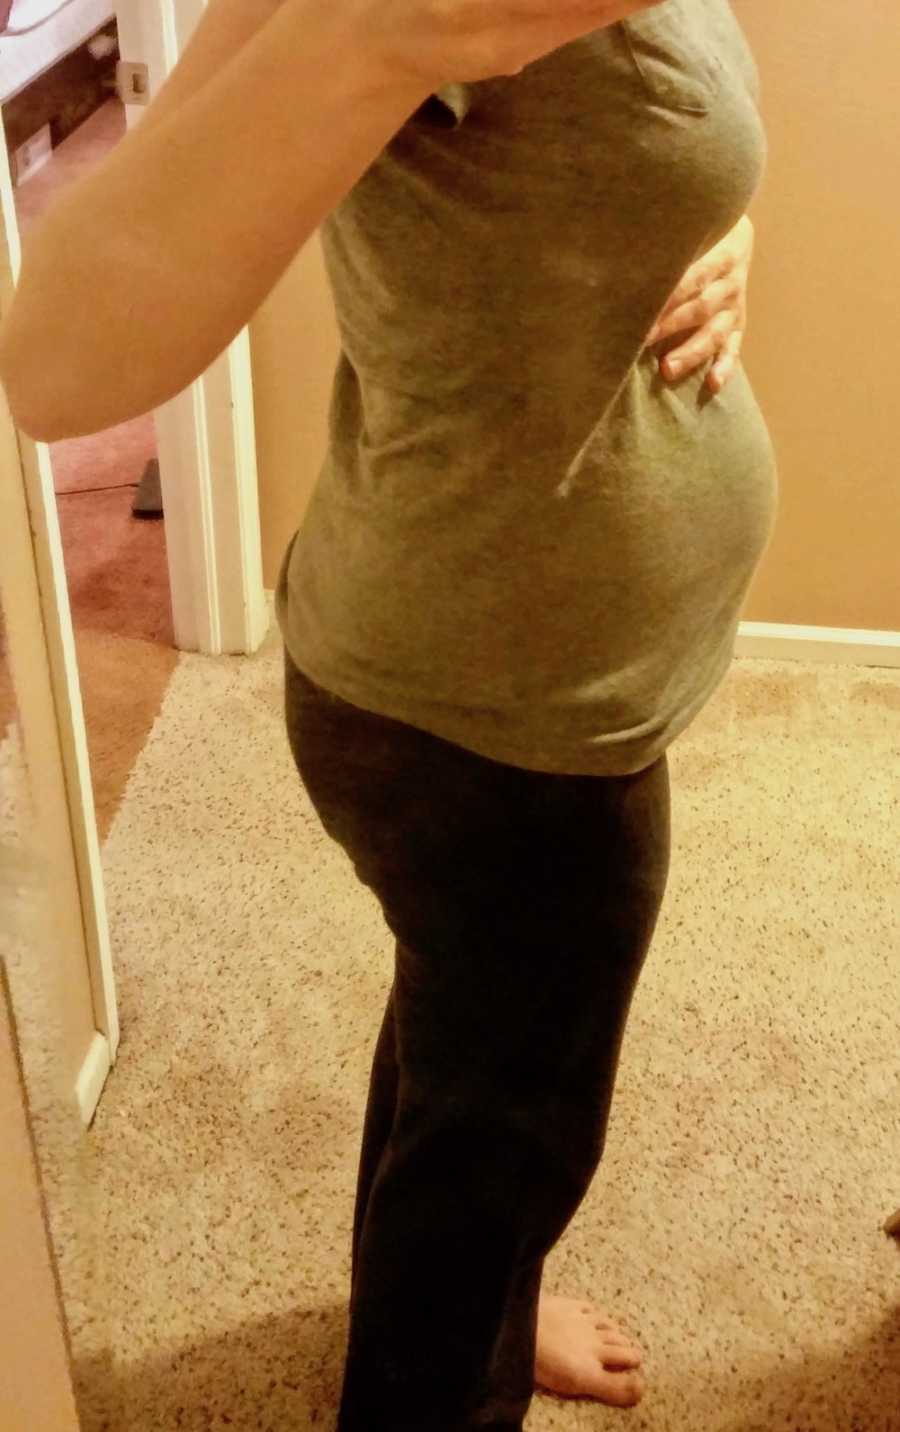 Pregnant woman stands with hand on stomach in mirror selfie